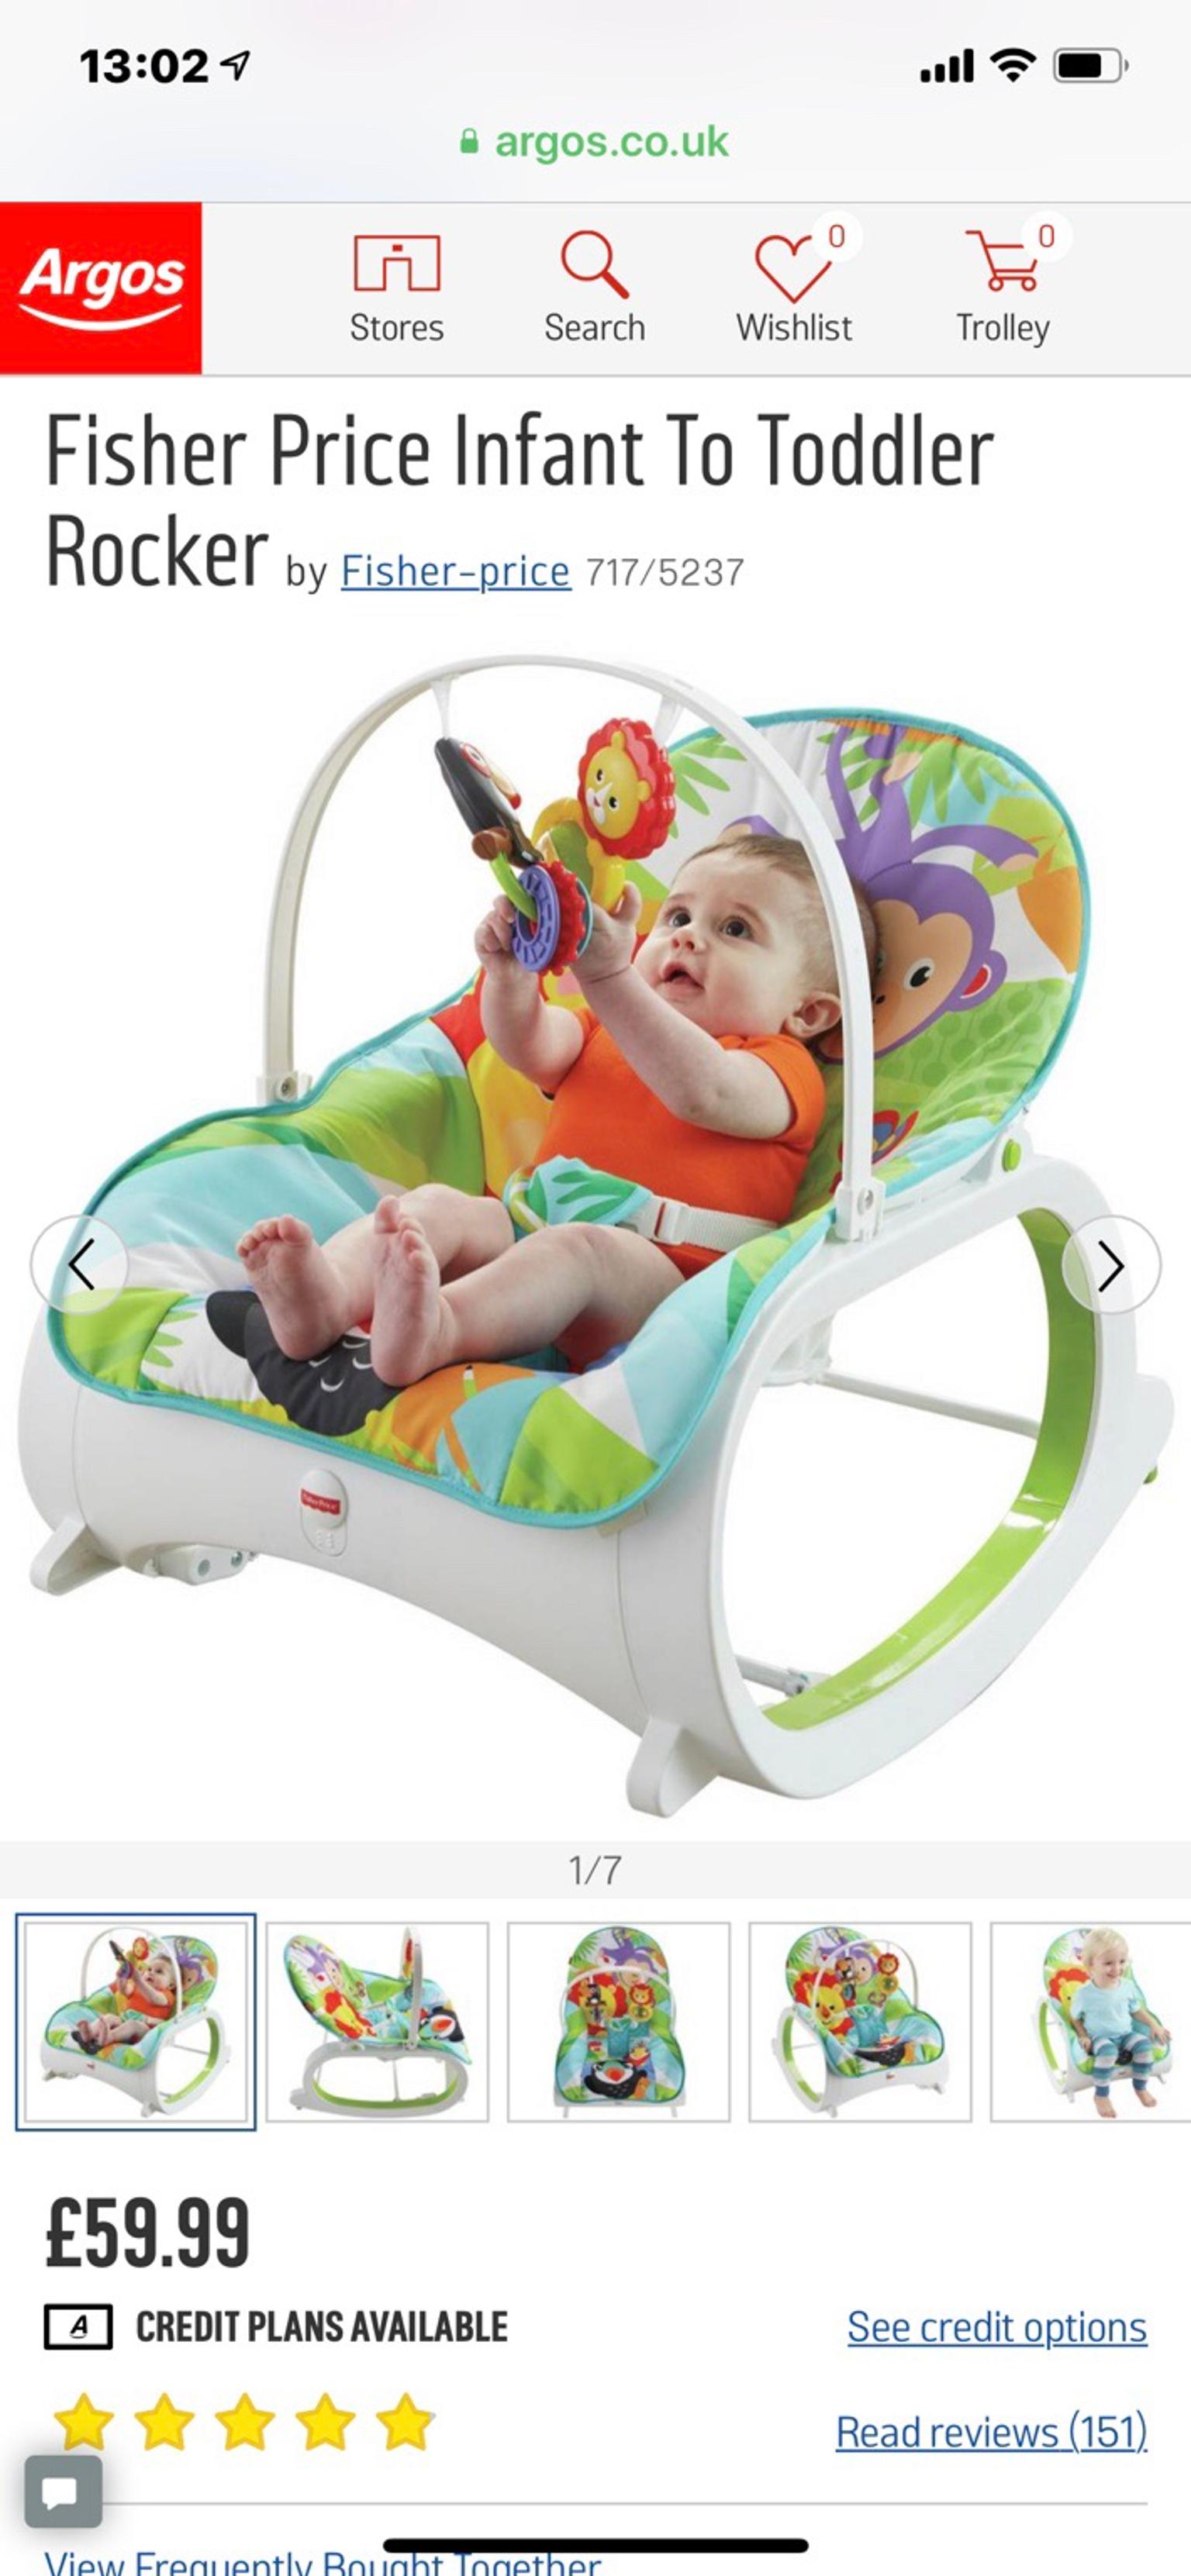 argos baby bouncers and rockers